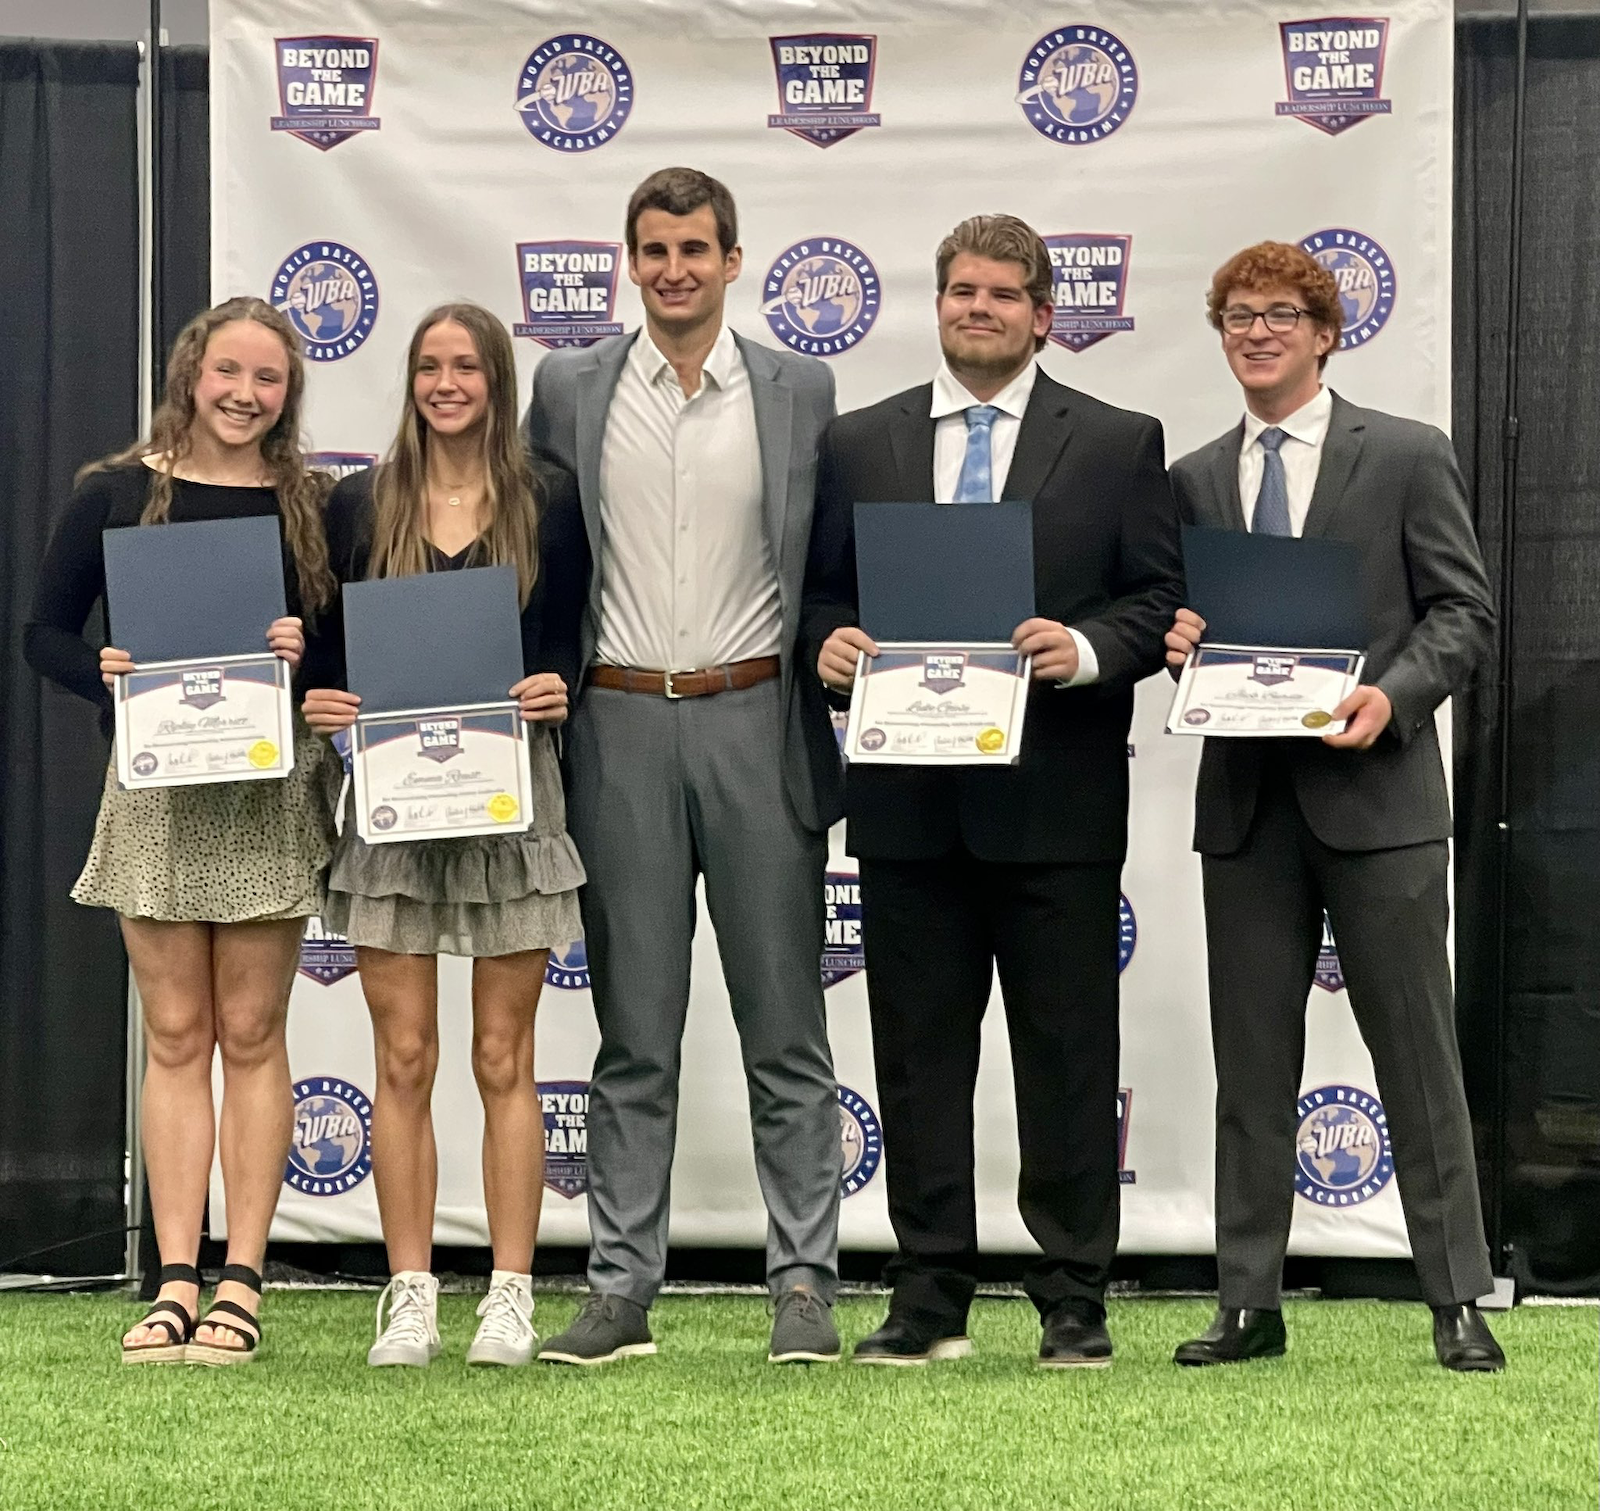 4 Homestead Juniors Receive Beyond the Game Leadership Award cover photo